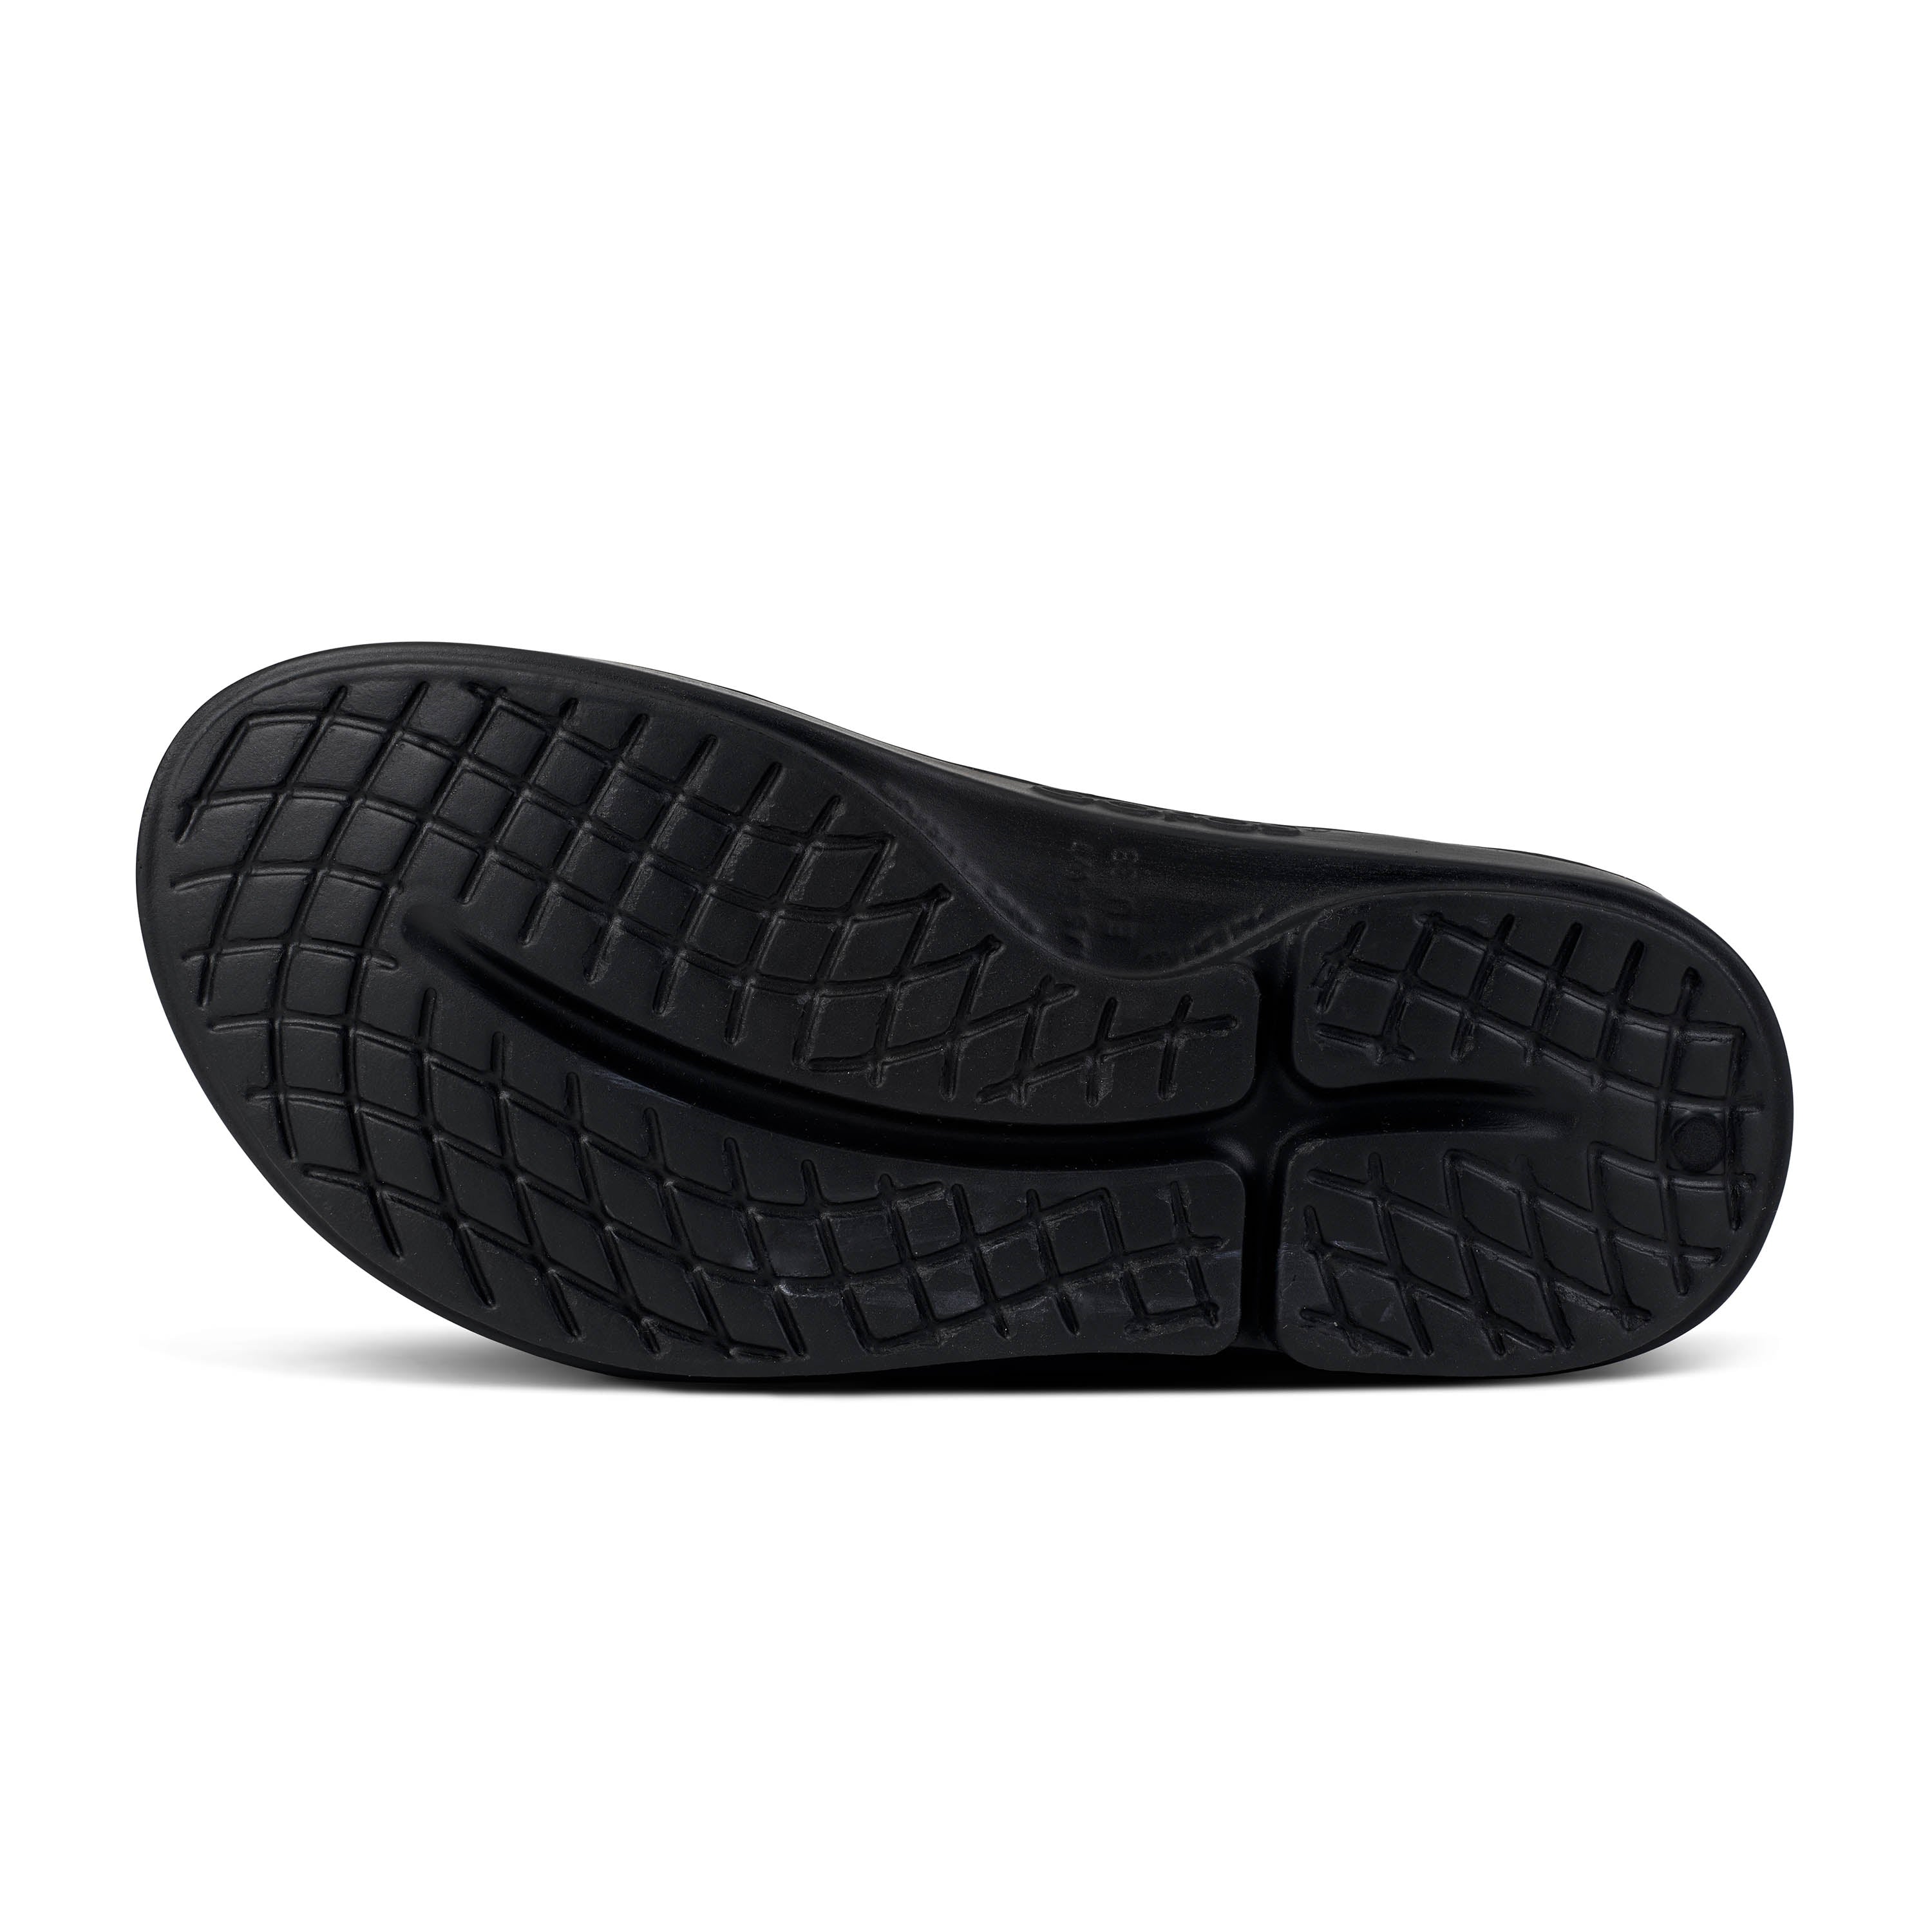 Oofos OOahh Limited Slide Women's